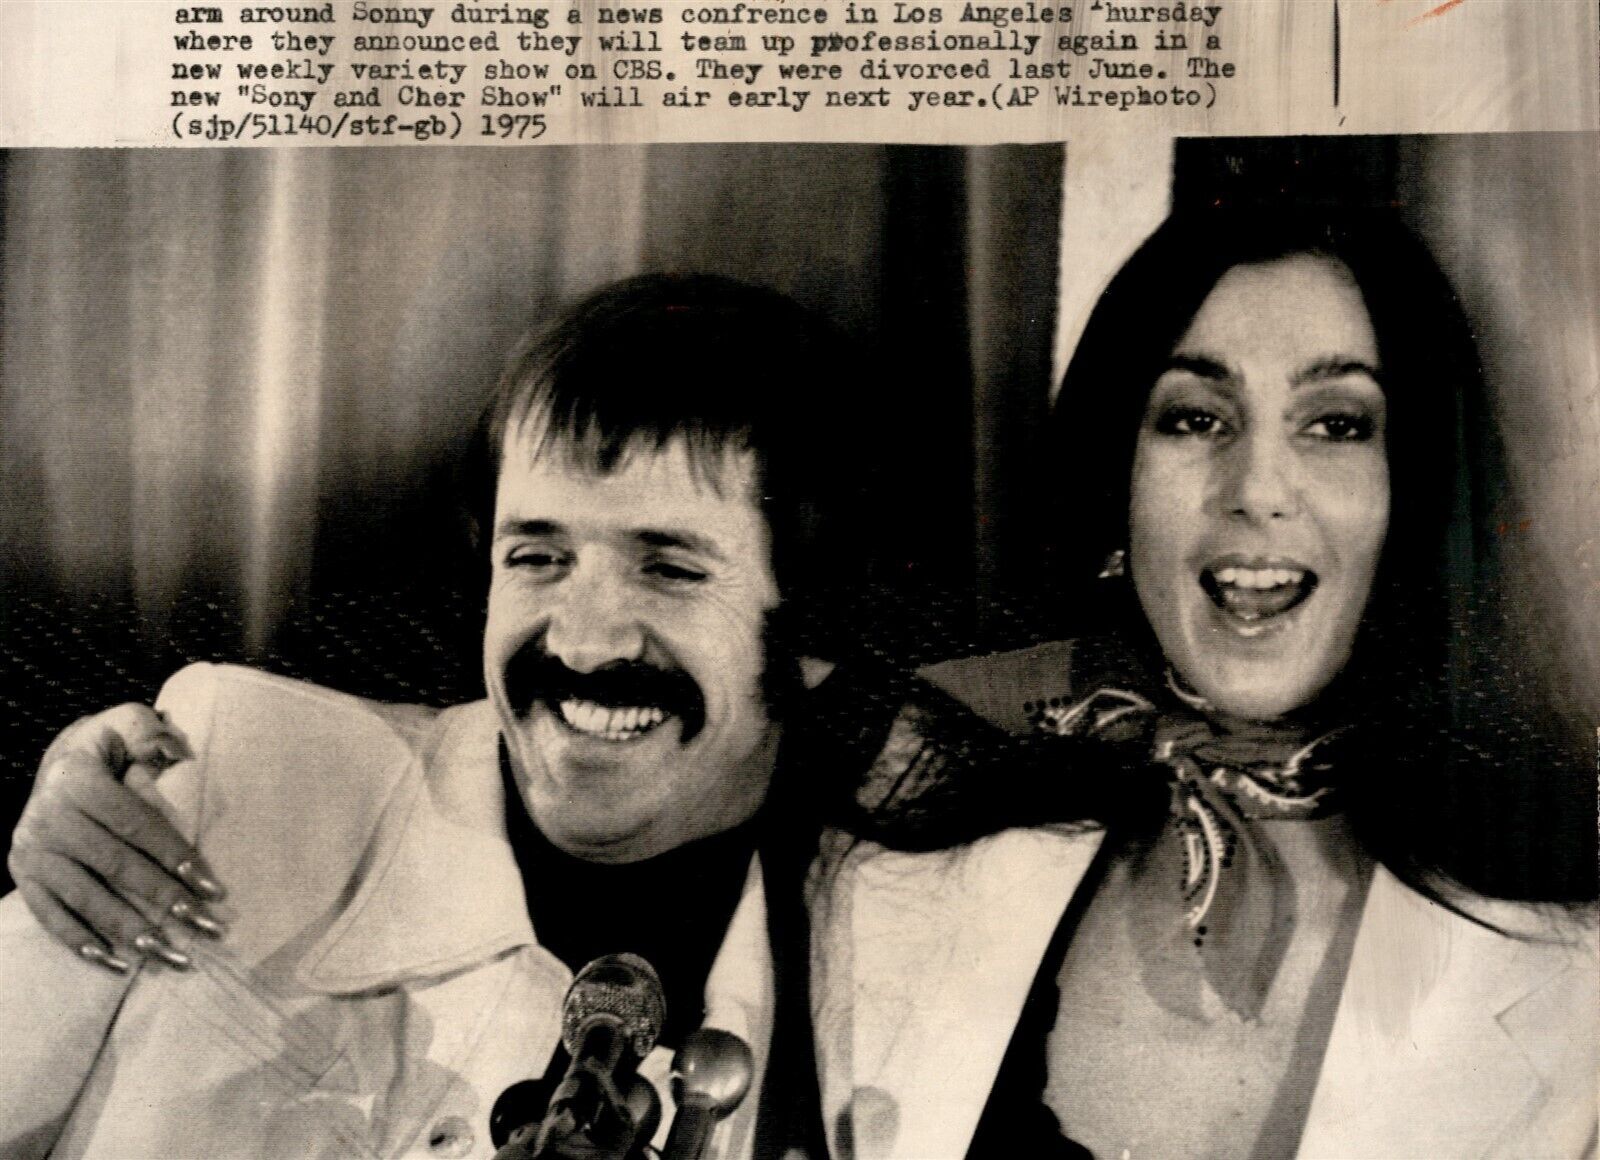 LG67 1975 AP Wire Photo CHER & SONNY BONO TOGETHER AGAIN FOR CBS VARIETY SHOW